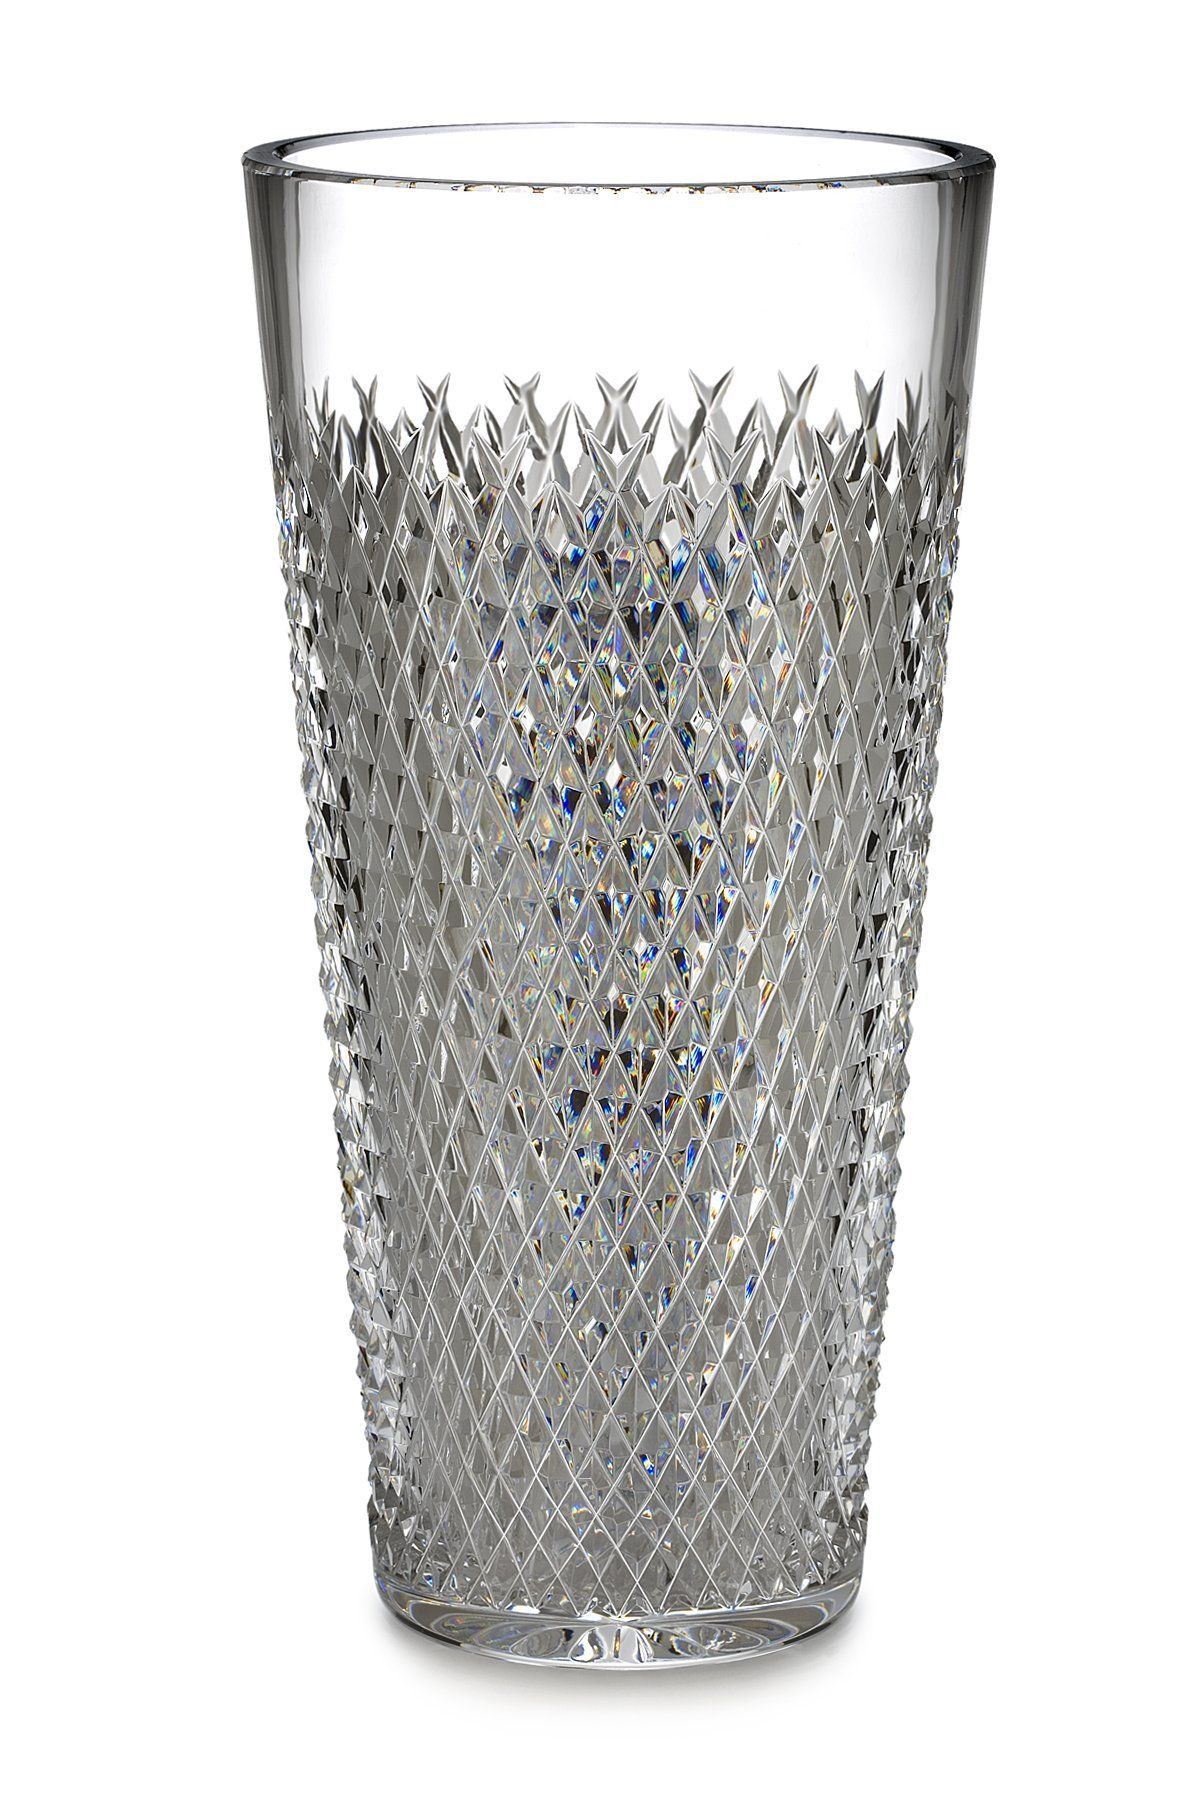 23 Lovable 12 Inch Cylinder Vases Cheap 2024 free download 12 inch cylinder vases cheap of waterford alana 12 inch vase 12 inch vase crystal alana vases with regard to waterford alana 12 inch vase 12 inch vase crystal alana